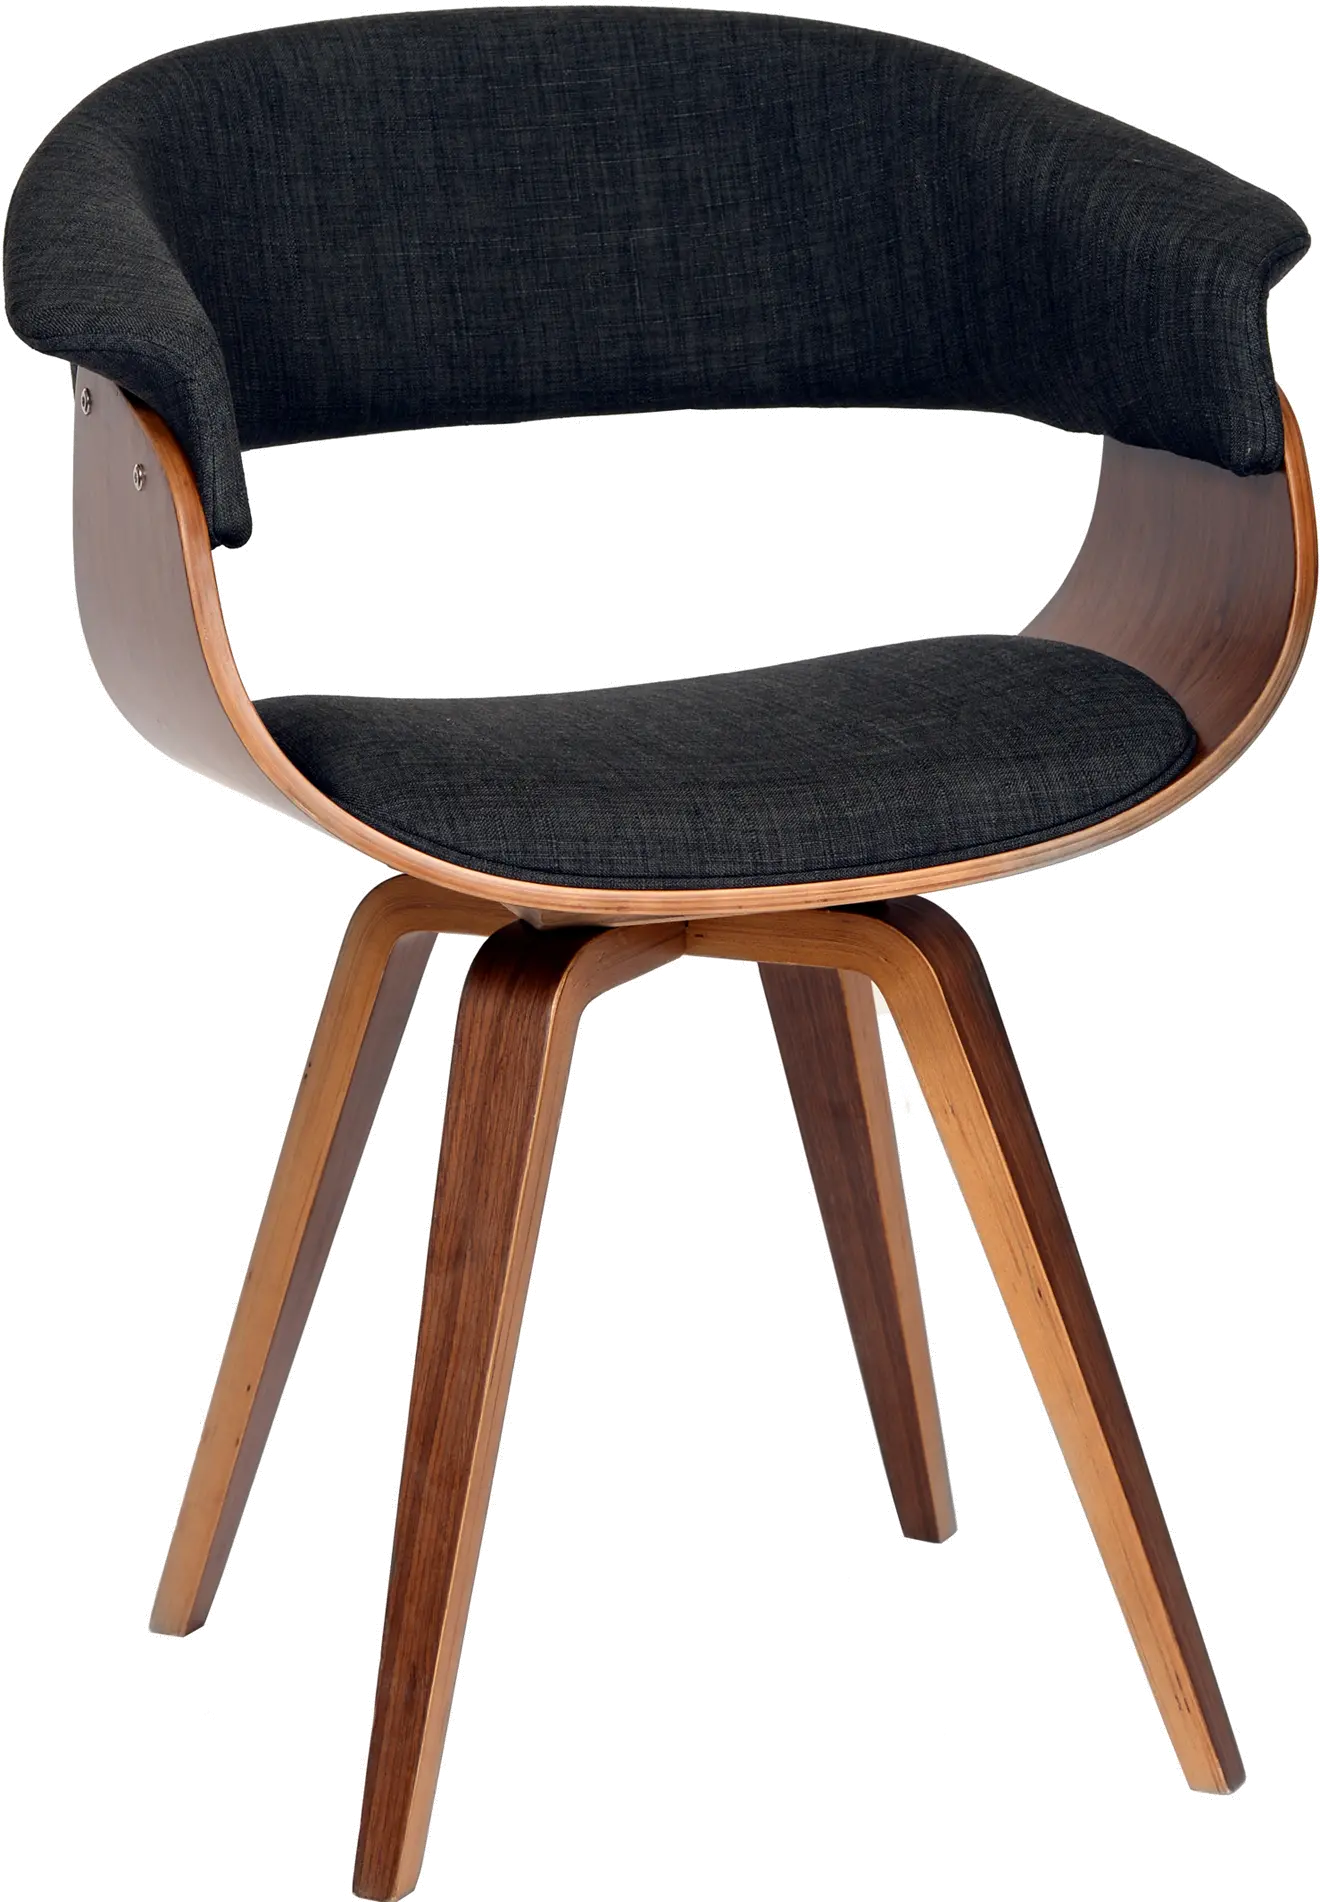 LCSUCHWACH Summer Charcoal and Walnut Dining Room Chair sku LCSUCHWACH